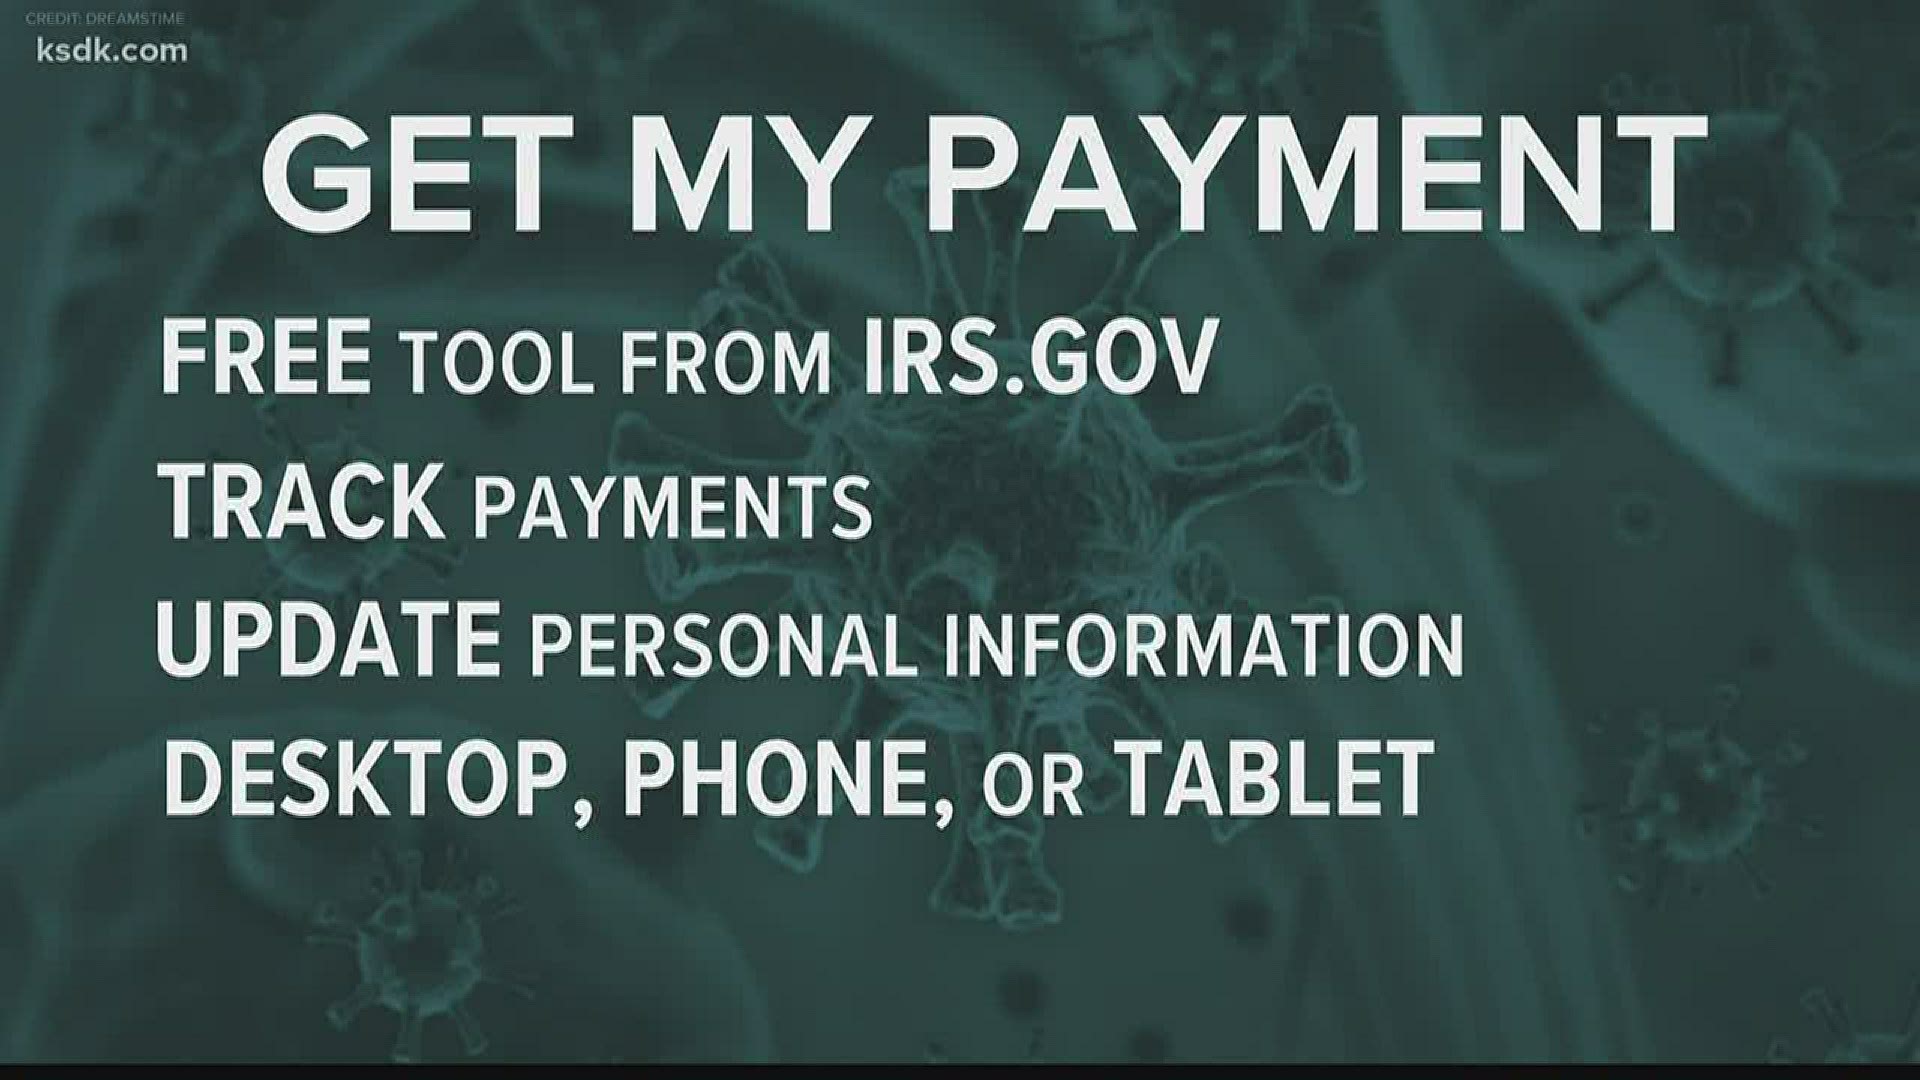 You can download the app on IRS.gov